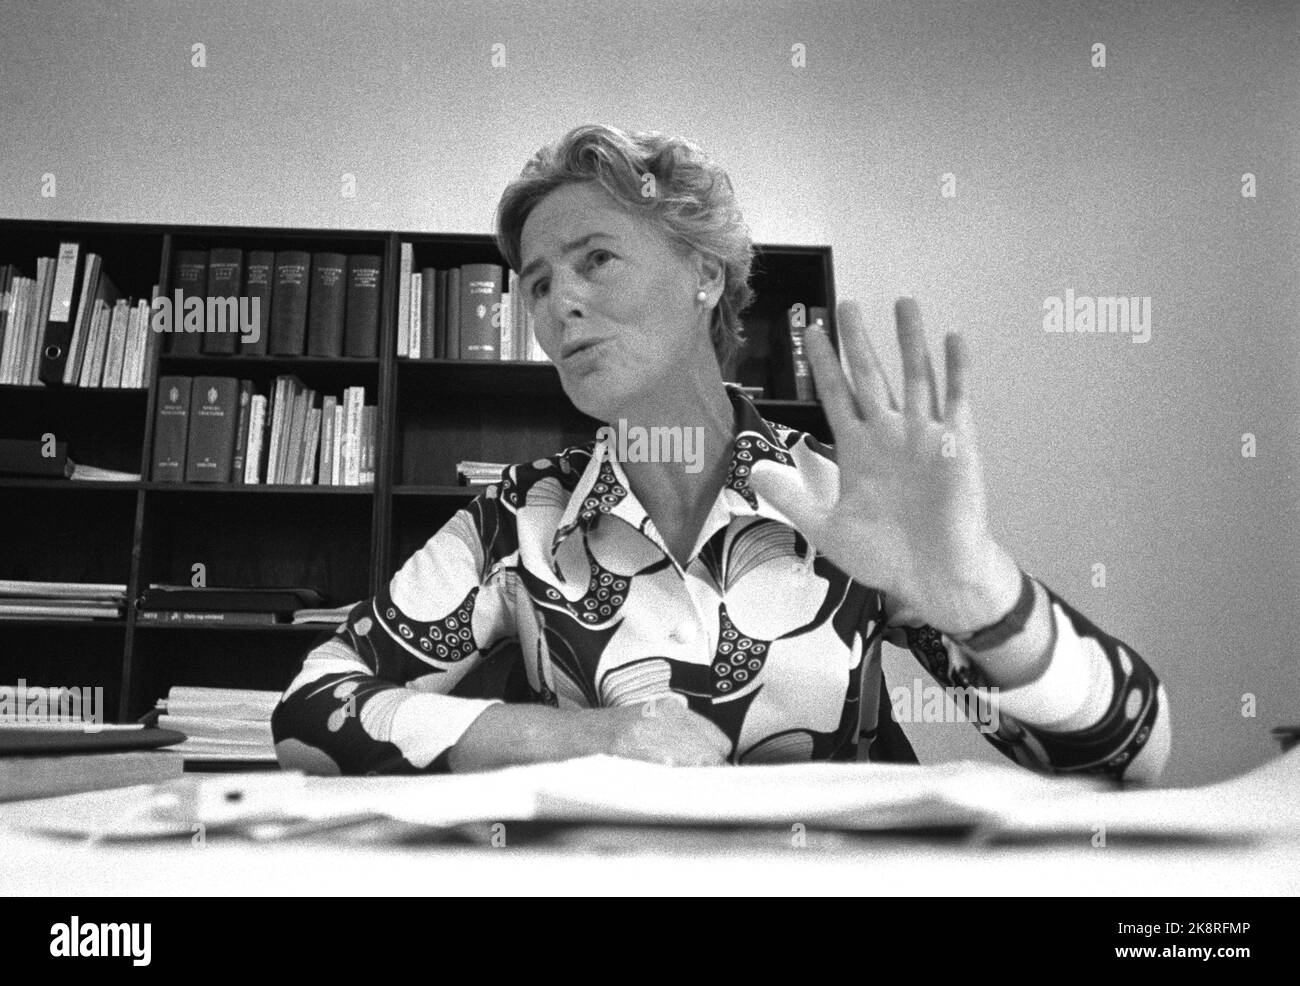 Inger louise valle Black and White Stock Photos & Images - Alamy